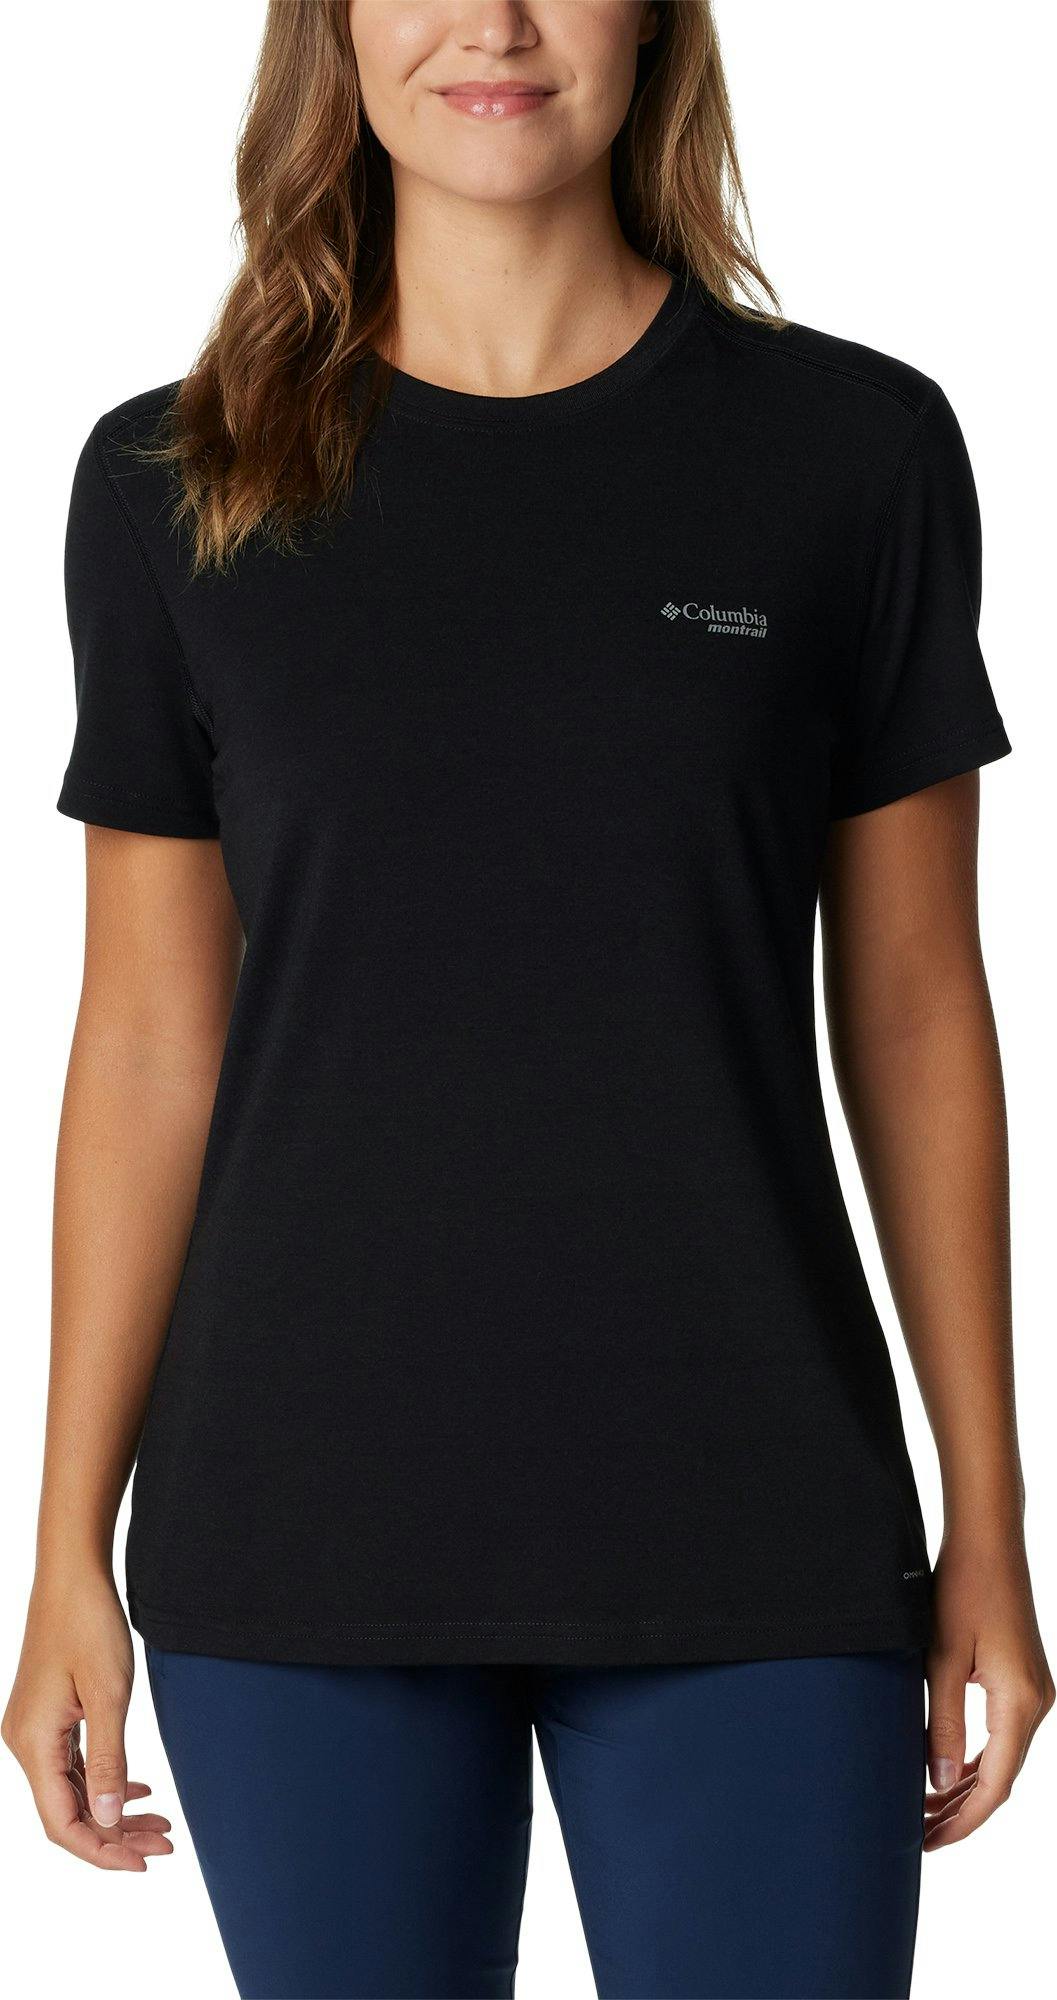 Product image for Endless Trail™ Running Tech Tee - Women's